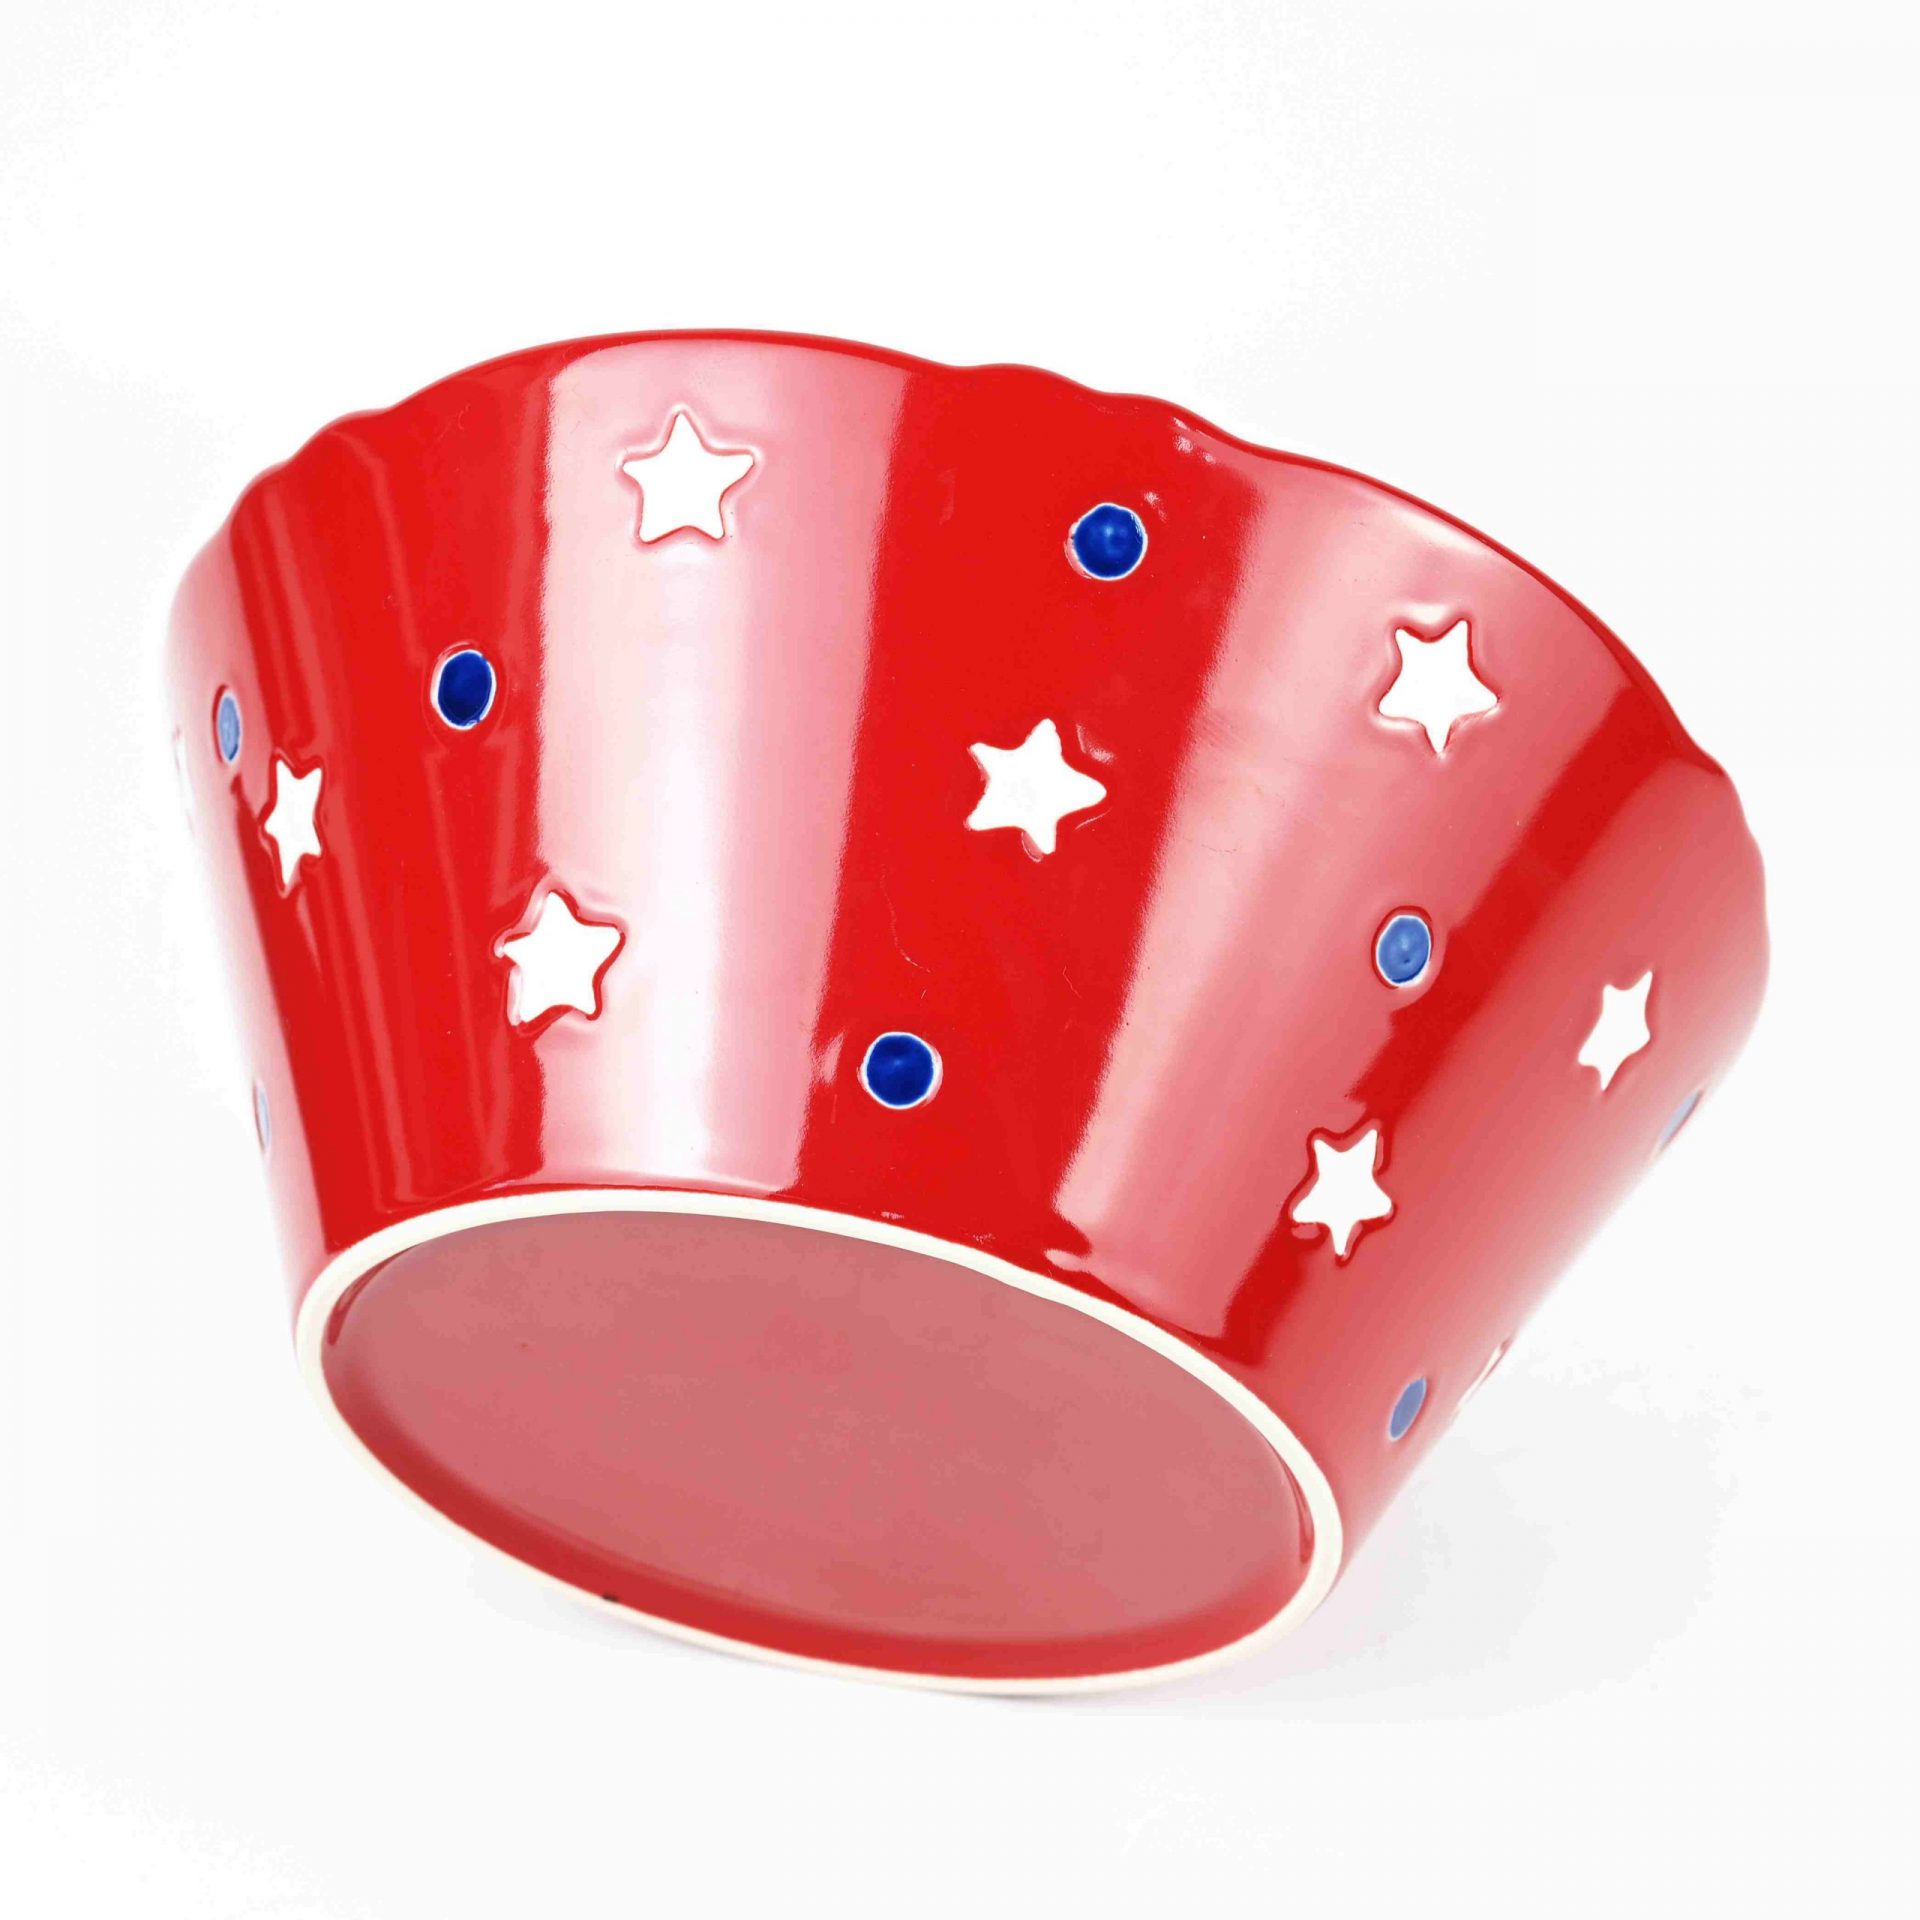 bowl with star design